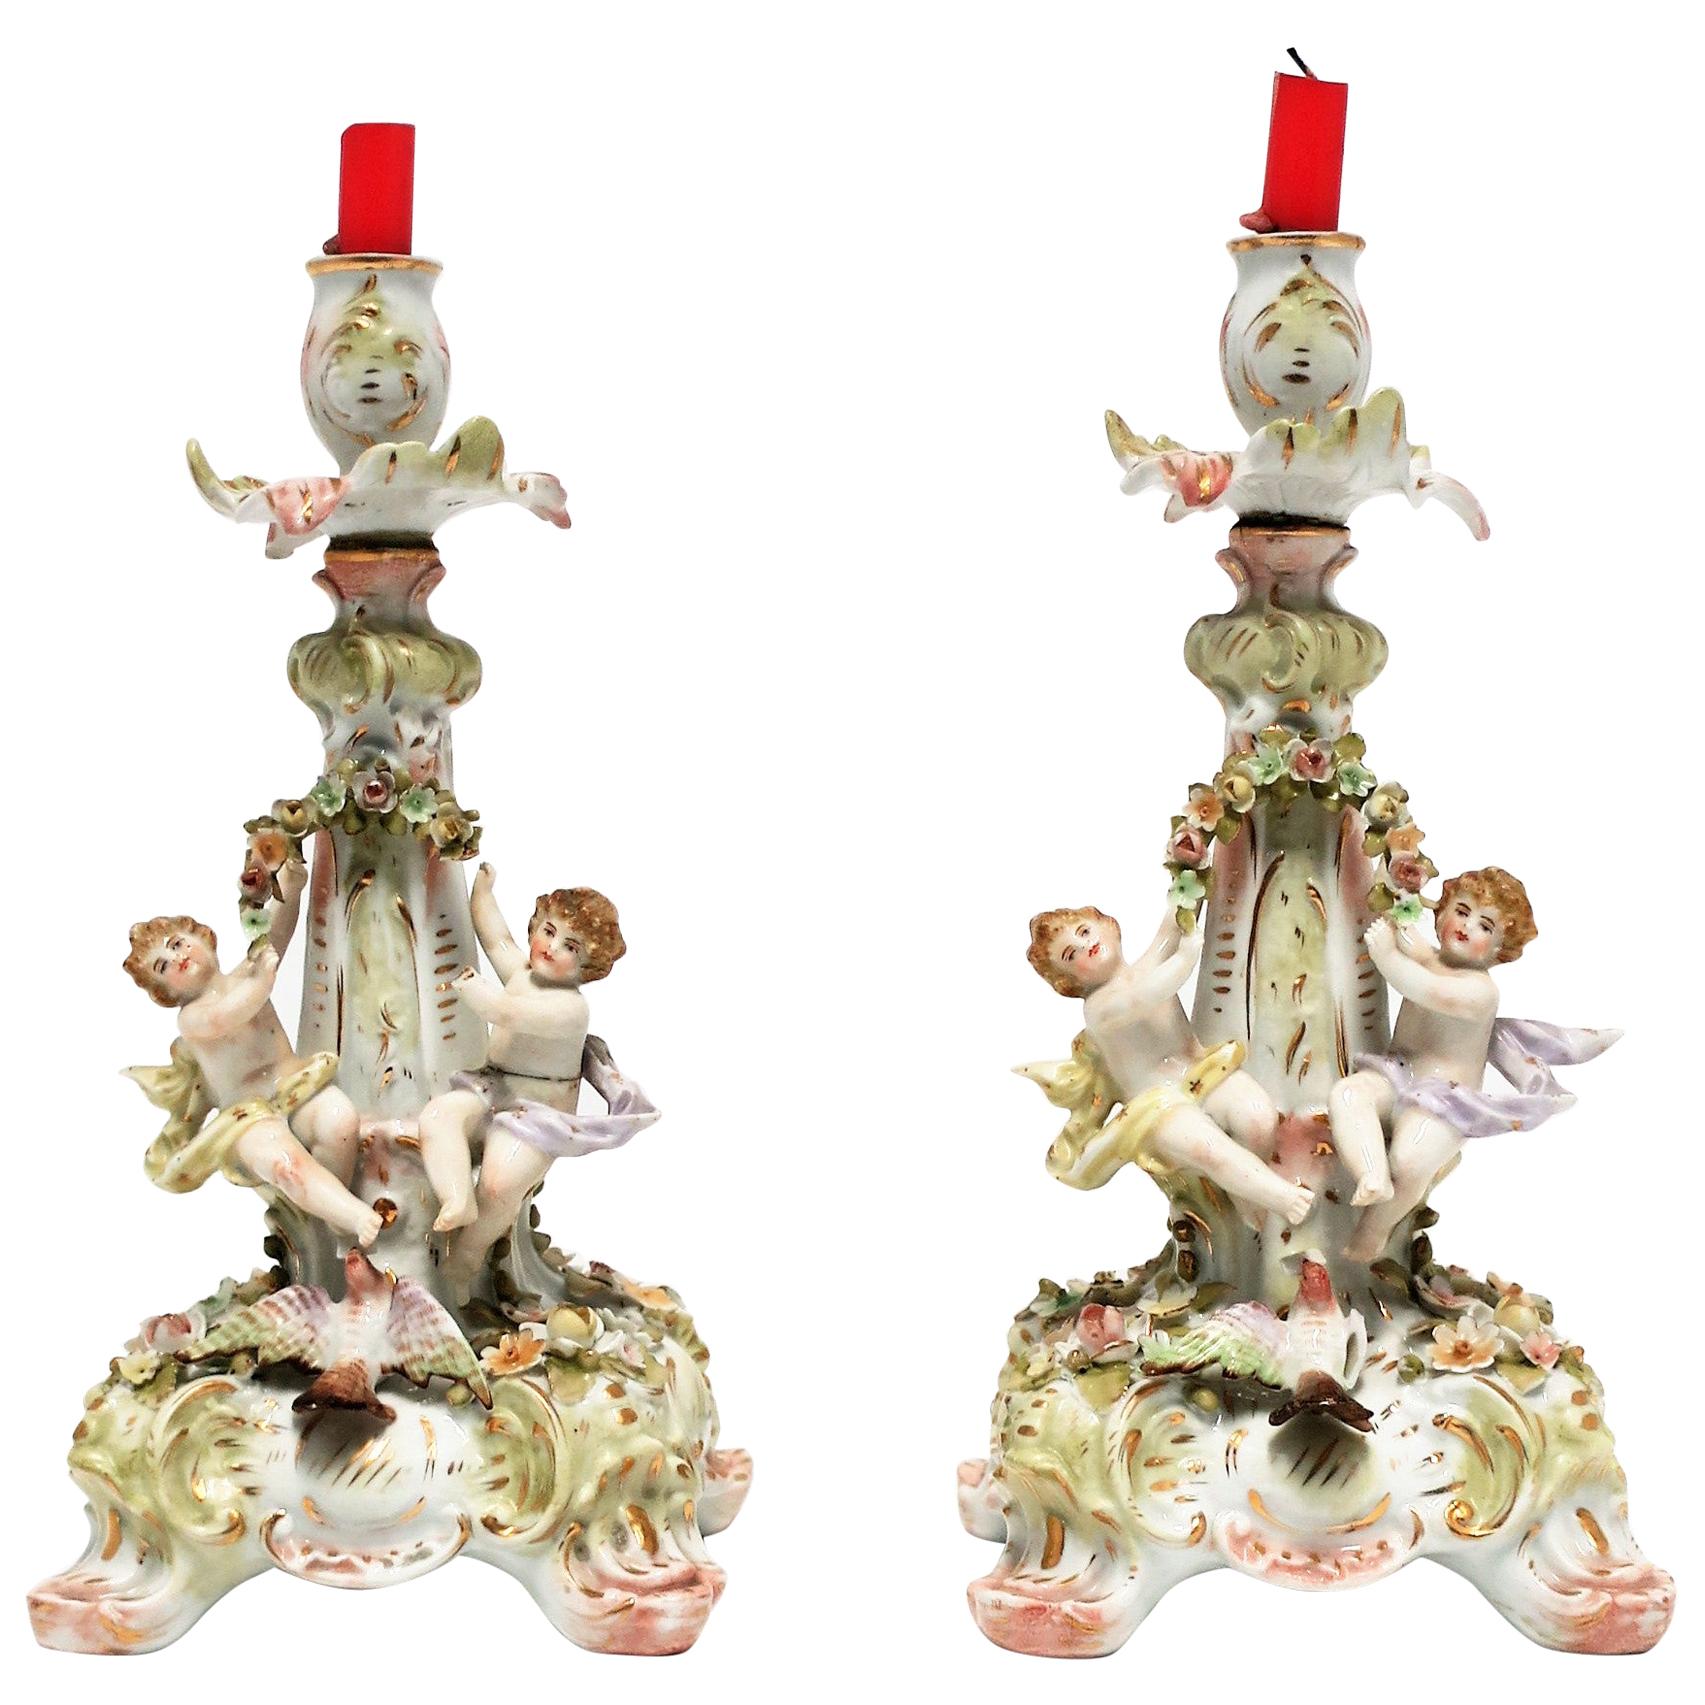 Antique Rococo German Porcelain Candlesticks Holders with Putti, Pair 